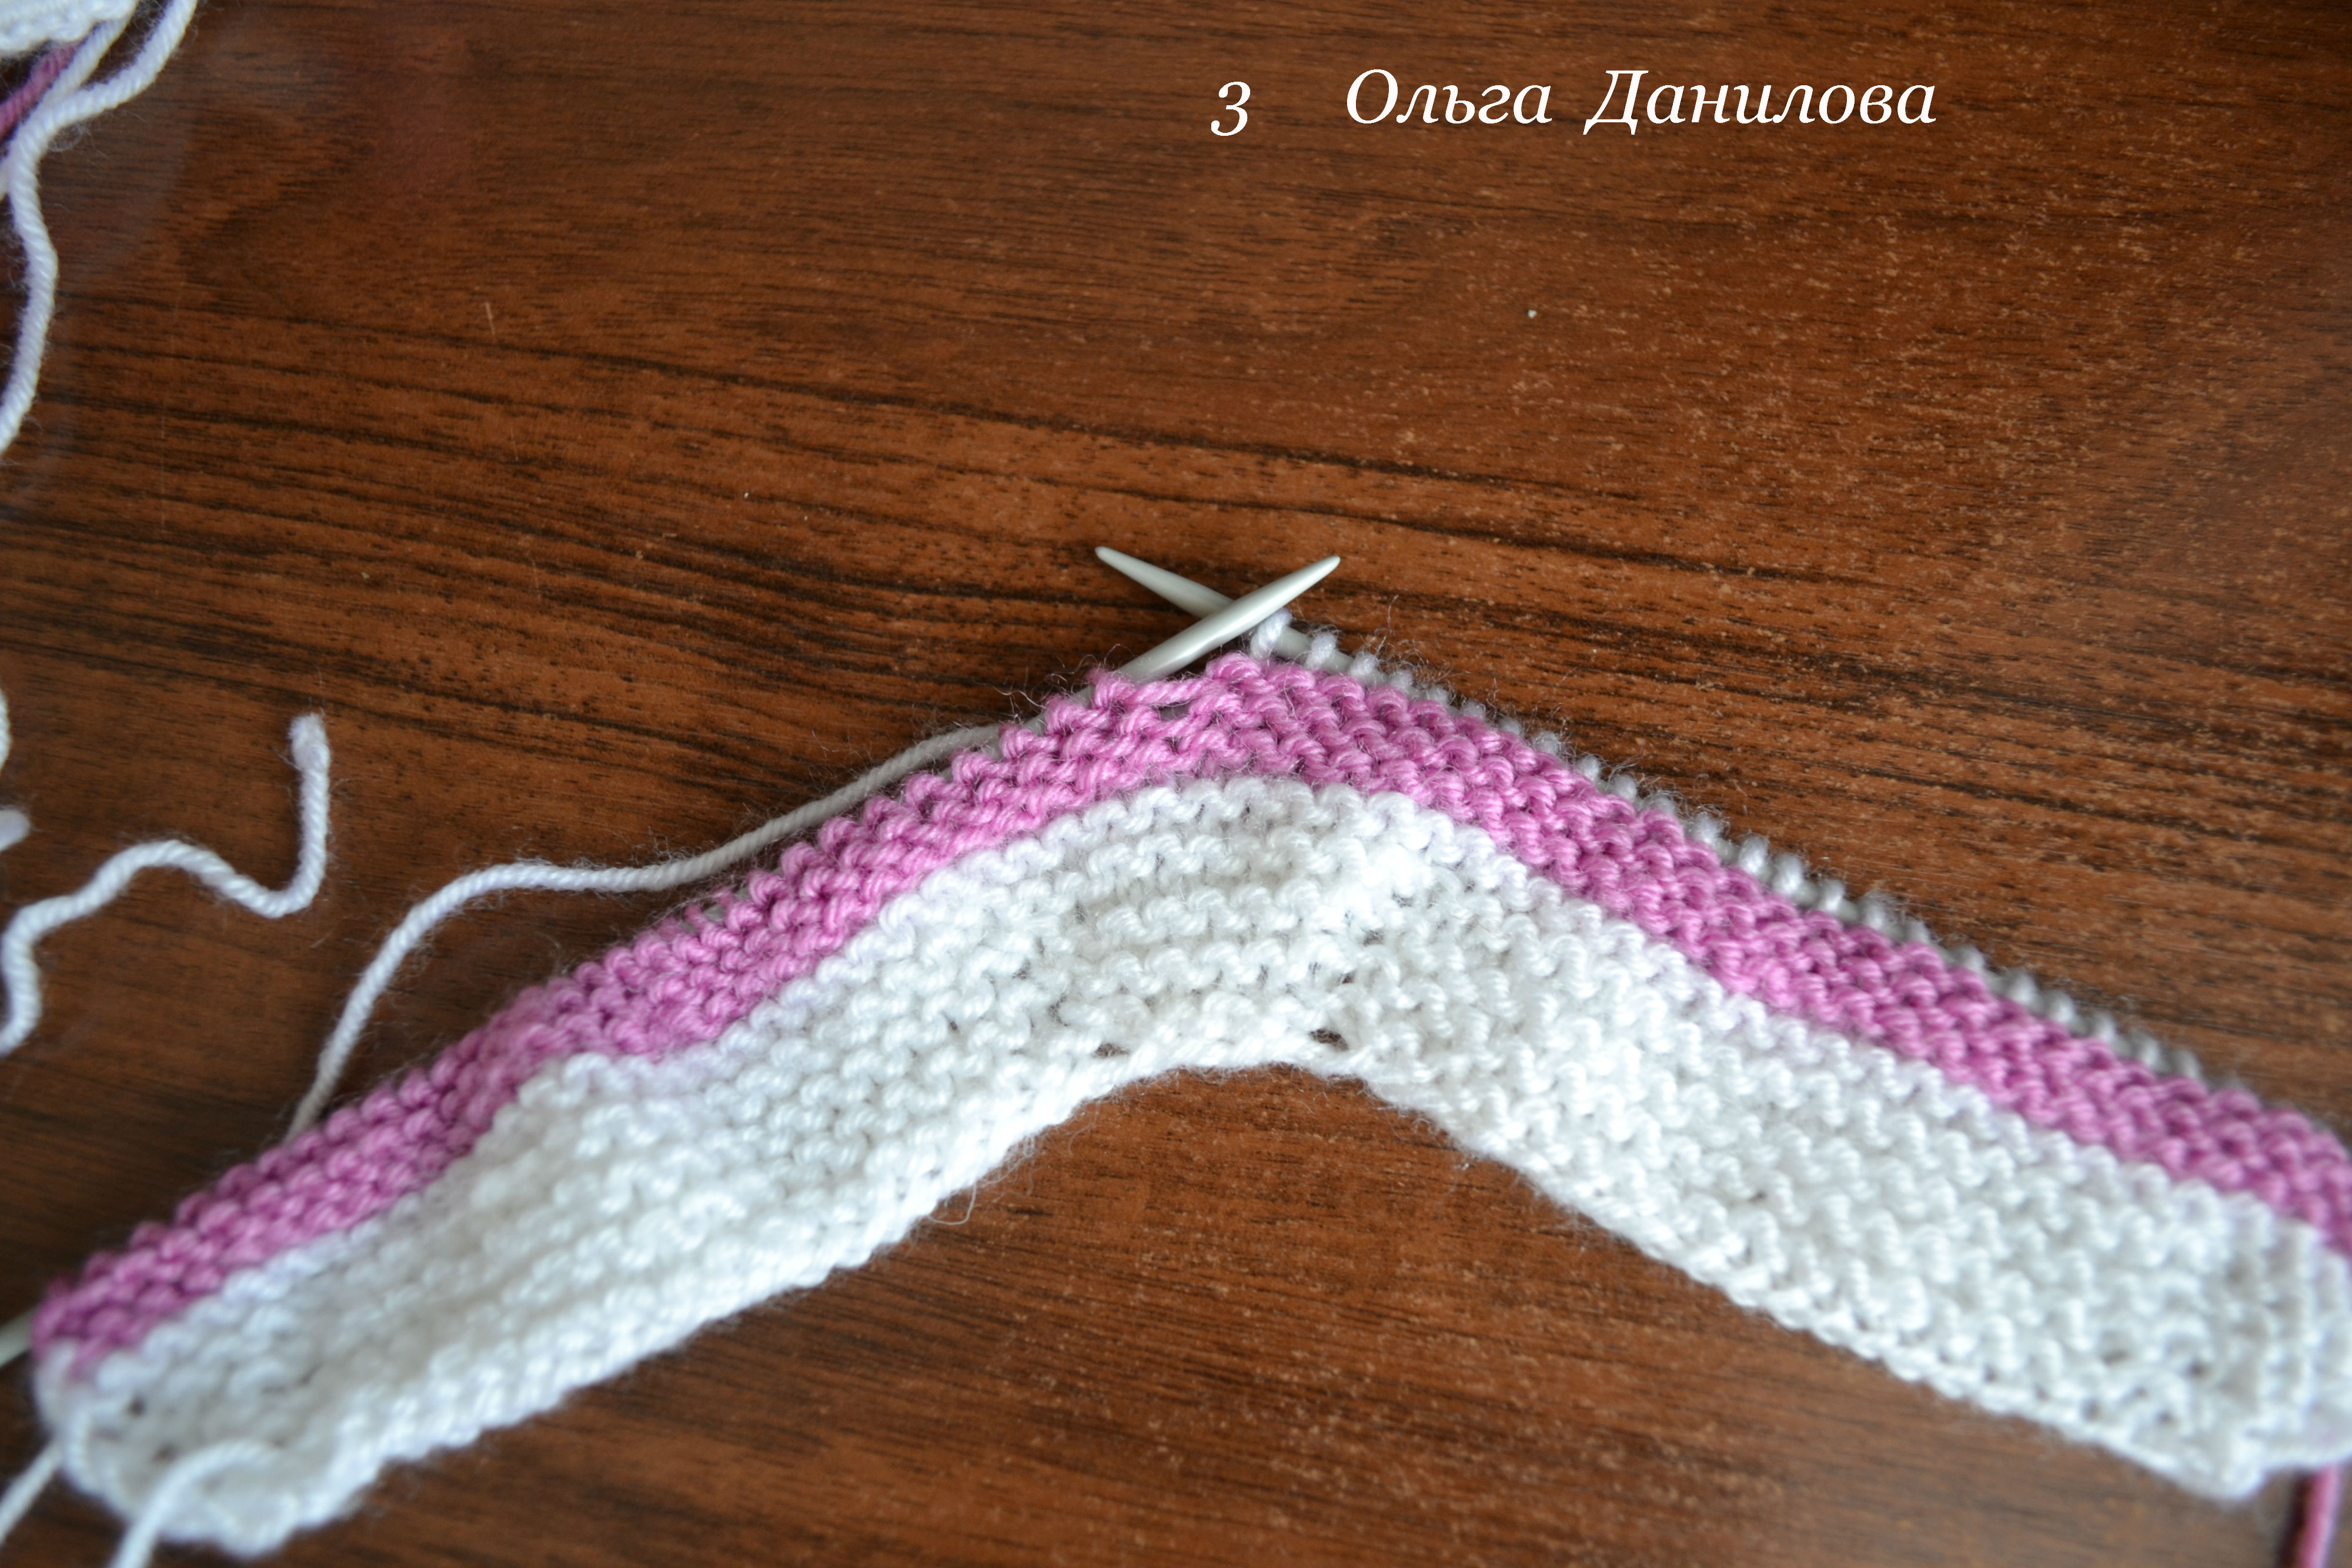 How-to-Make-Pretty-Knitted-Baby-Booties-3.jpg